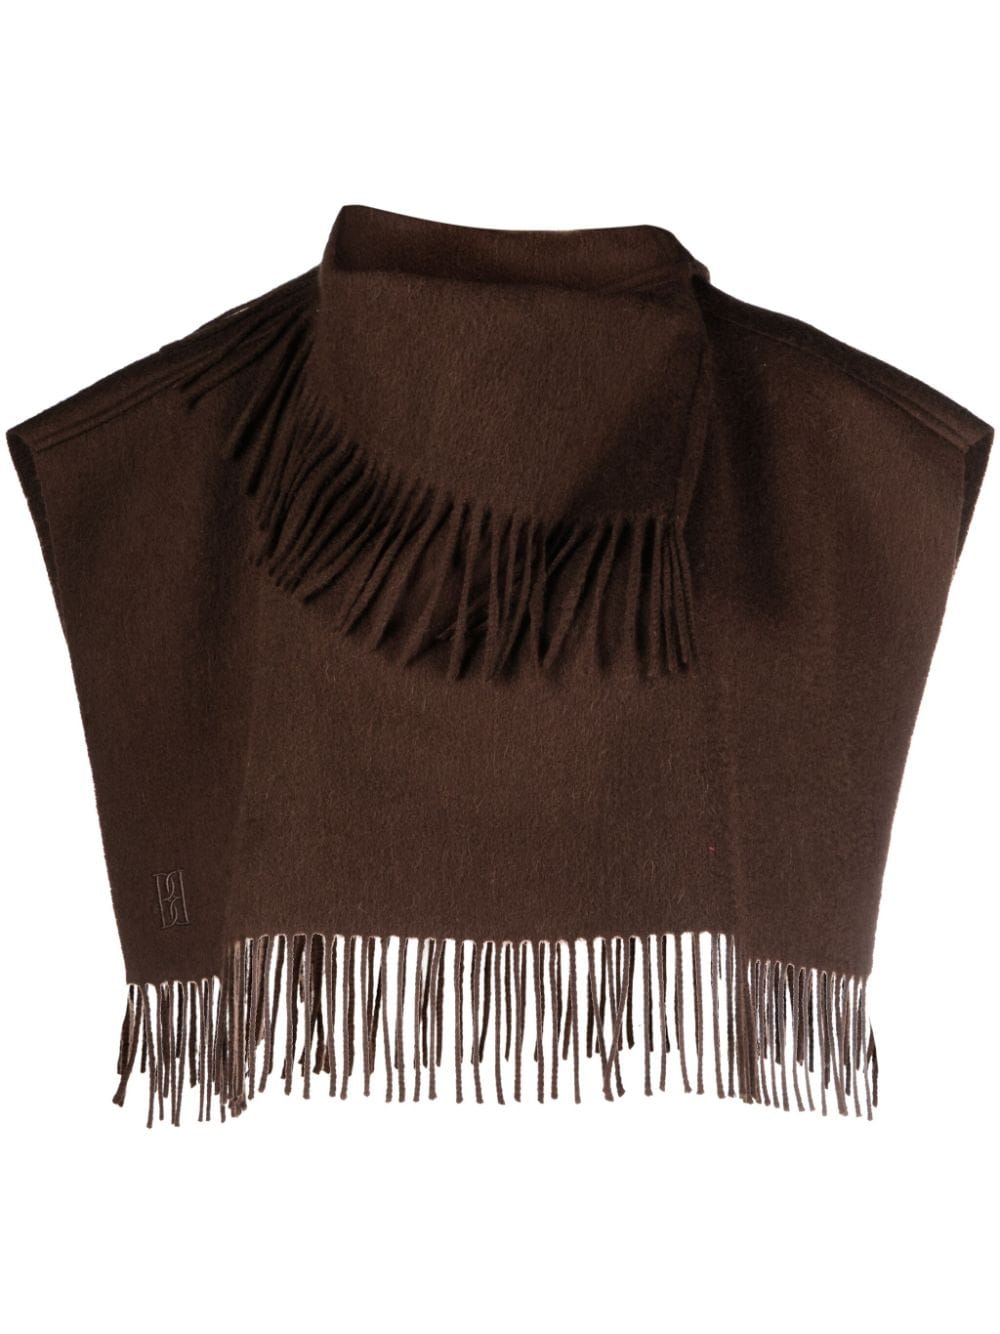 By Malene Birger Turtla Fringed Wool Cape - $177

fun cape to add to any tee, sweater, or coat for warmth